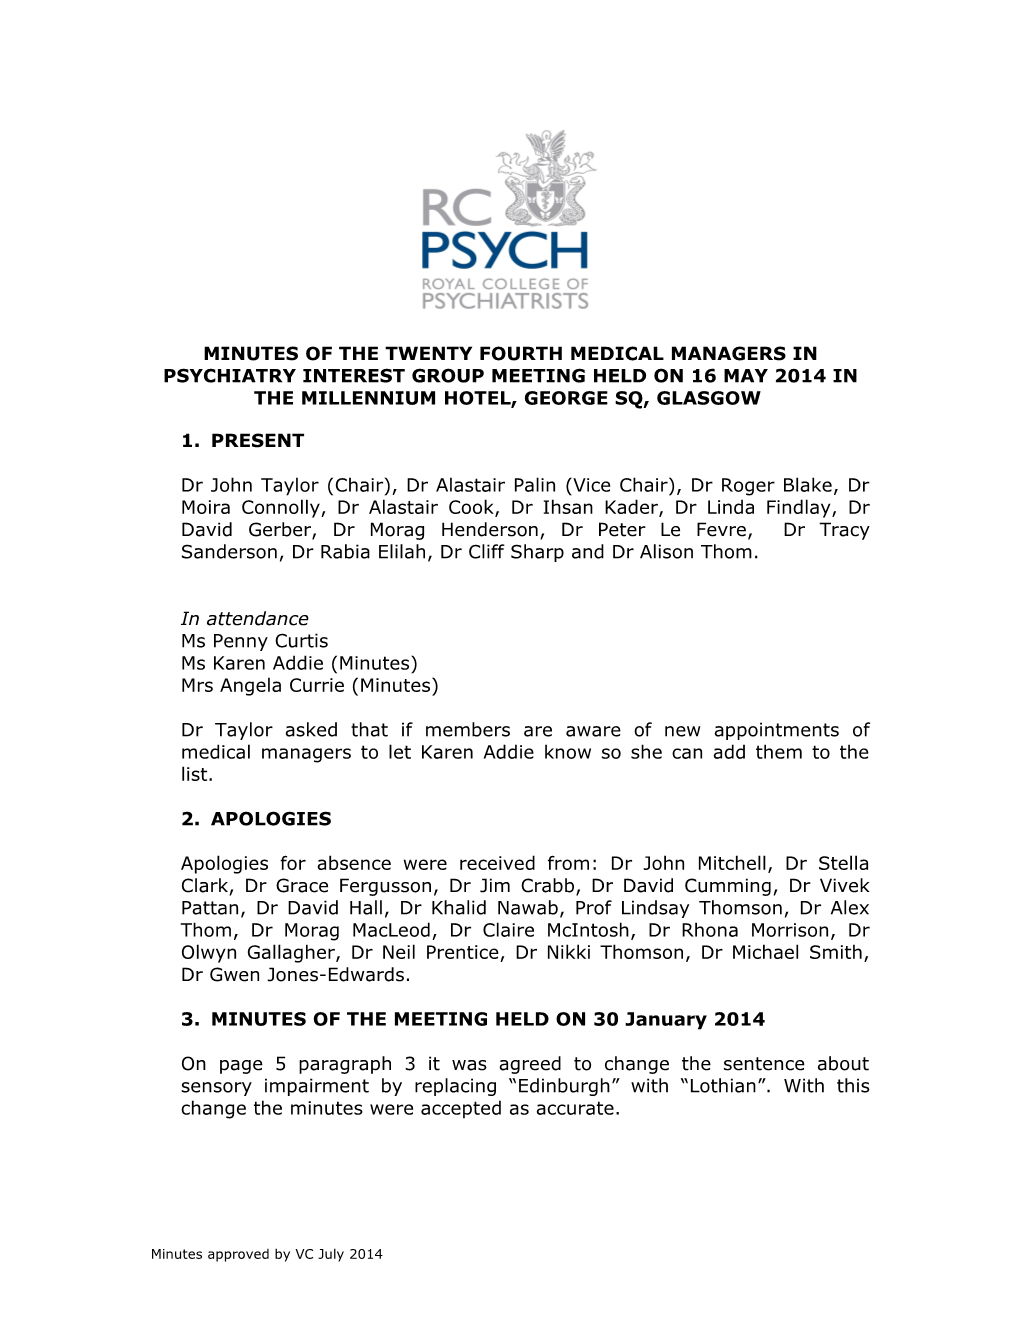 Minutes of the Twenty Fourthmedical Managers in Psychiatry Interest Group Meeting Held